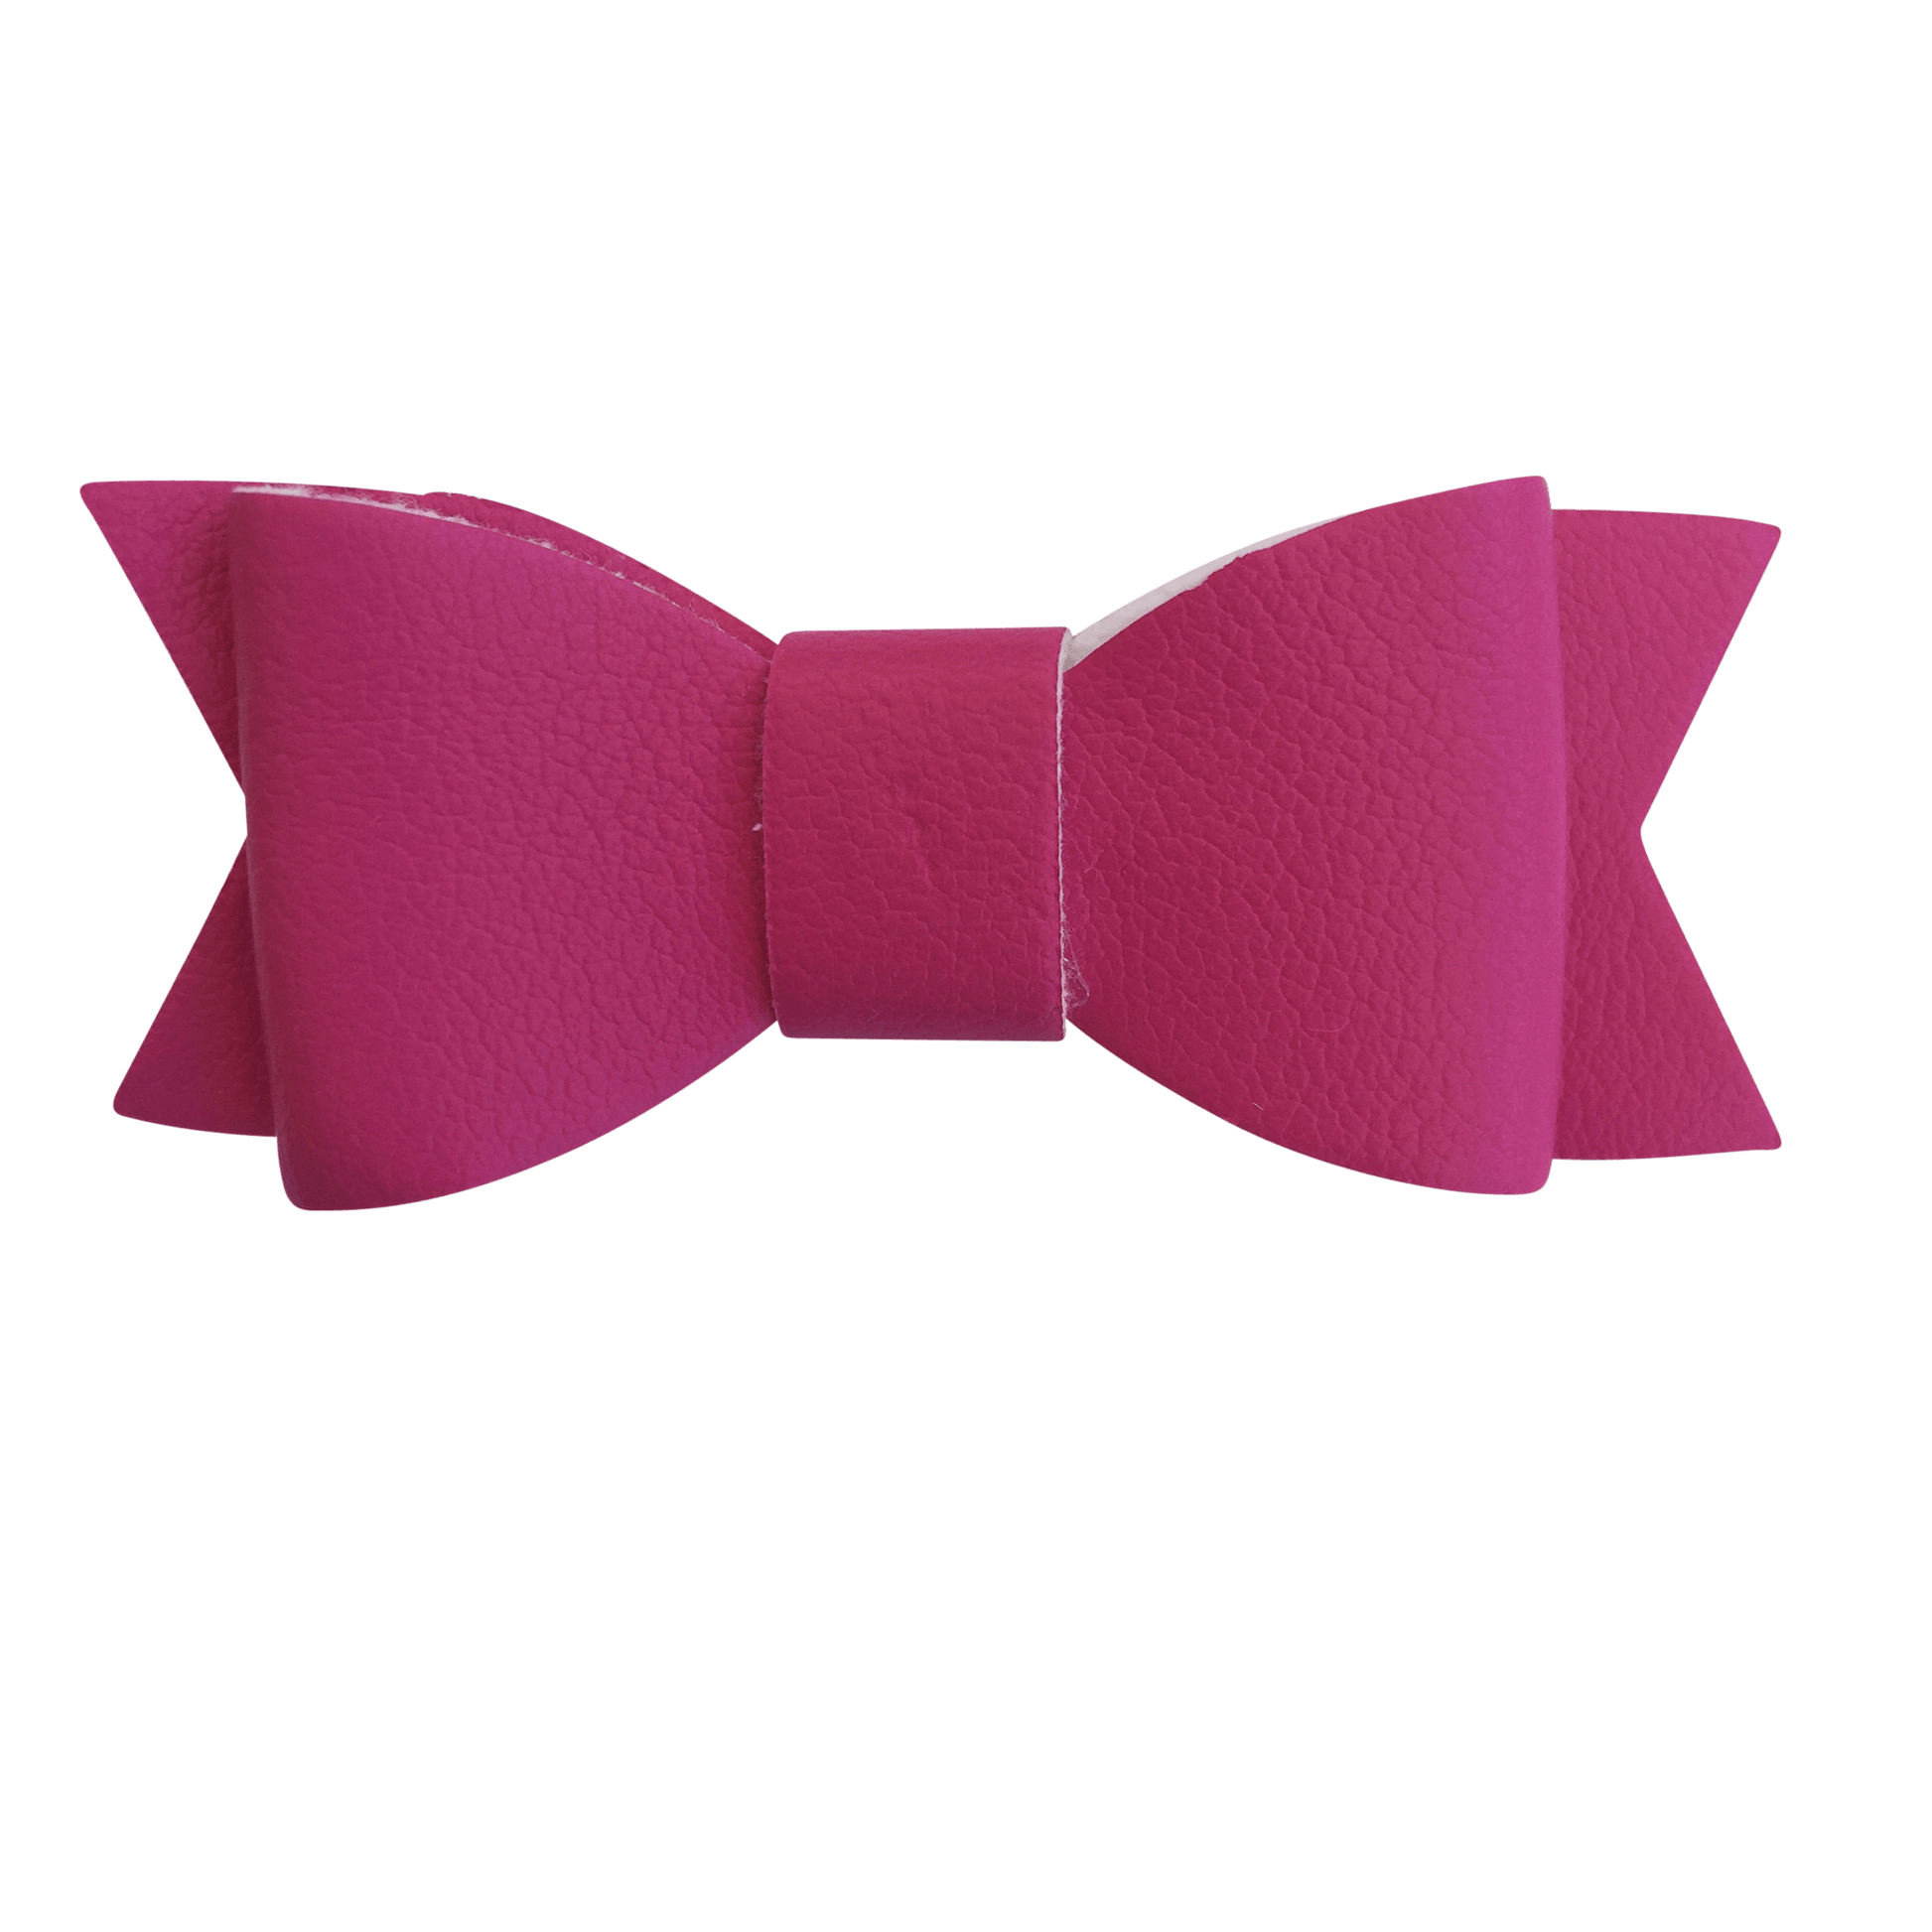 Fuschia Pink Hair Accessories - Assorted Hair Accessories - School Uniform Hair Accessories - Ponytails and Fairytales